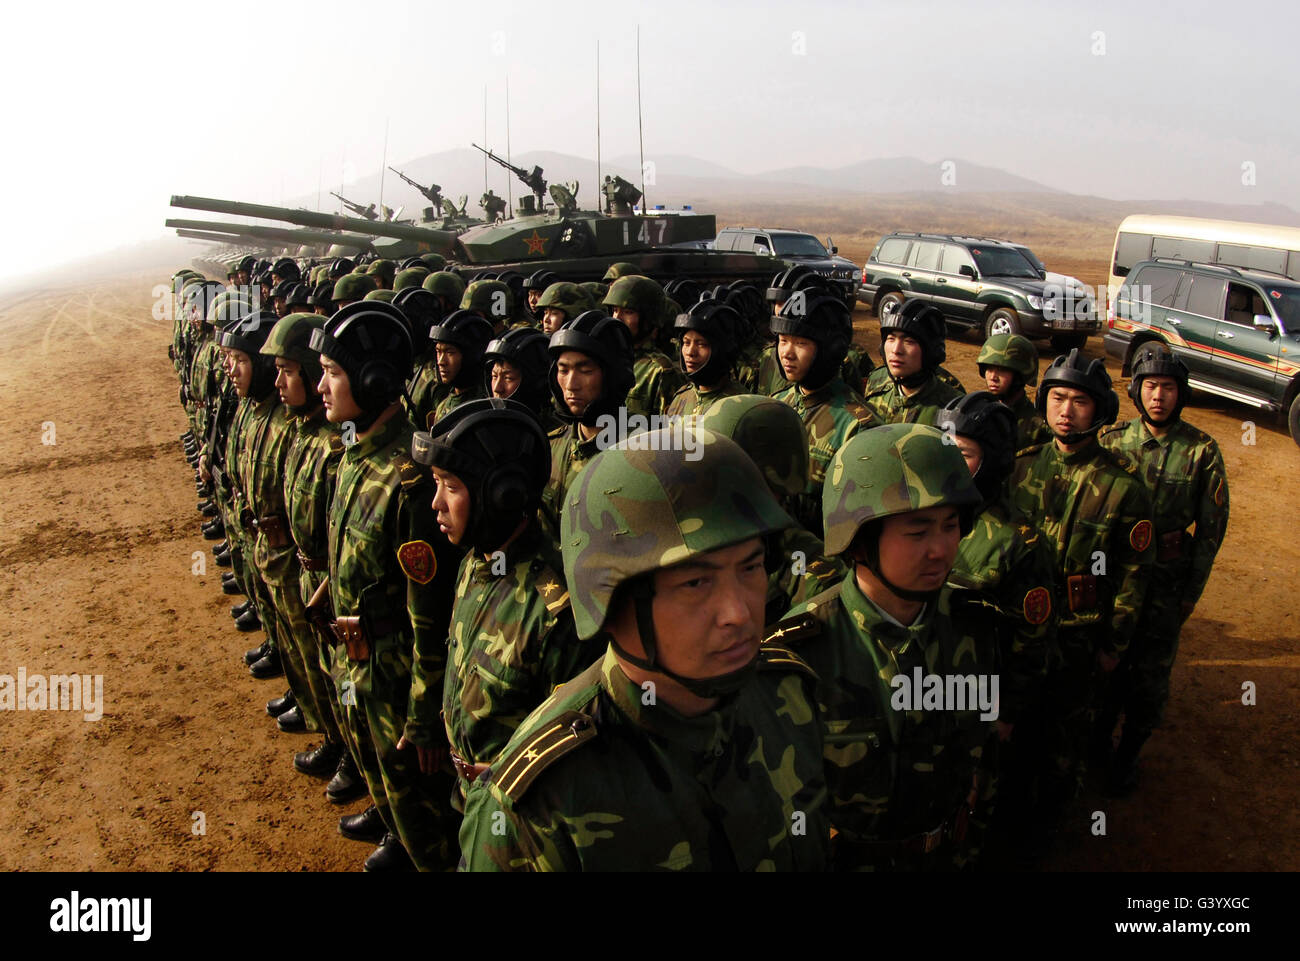 Soldiers with the People's Liberation Army at Shenyang training base in China. Stock Photo